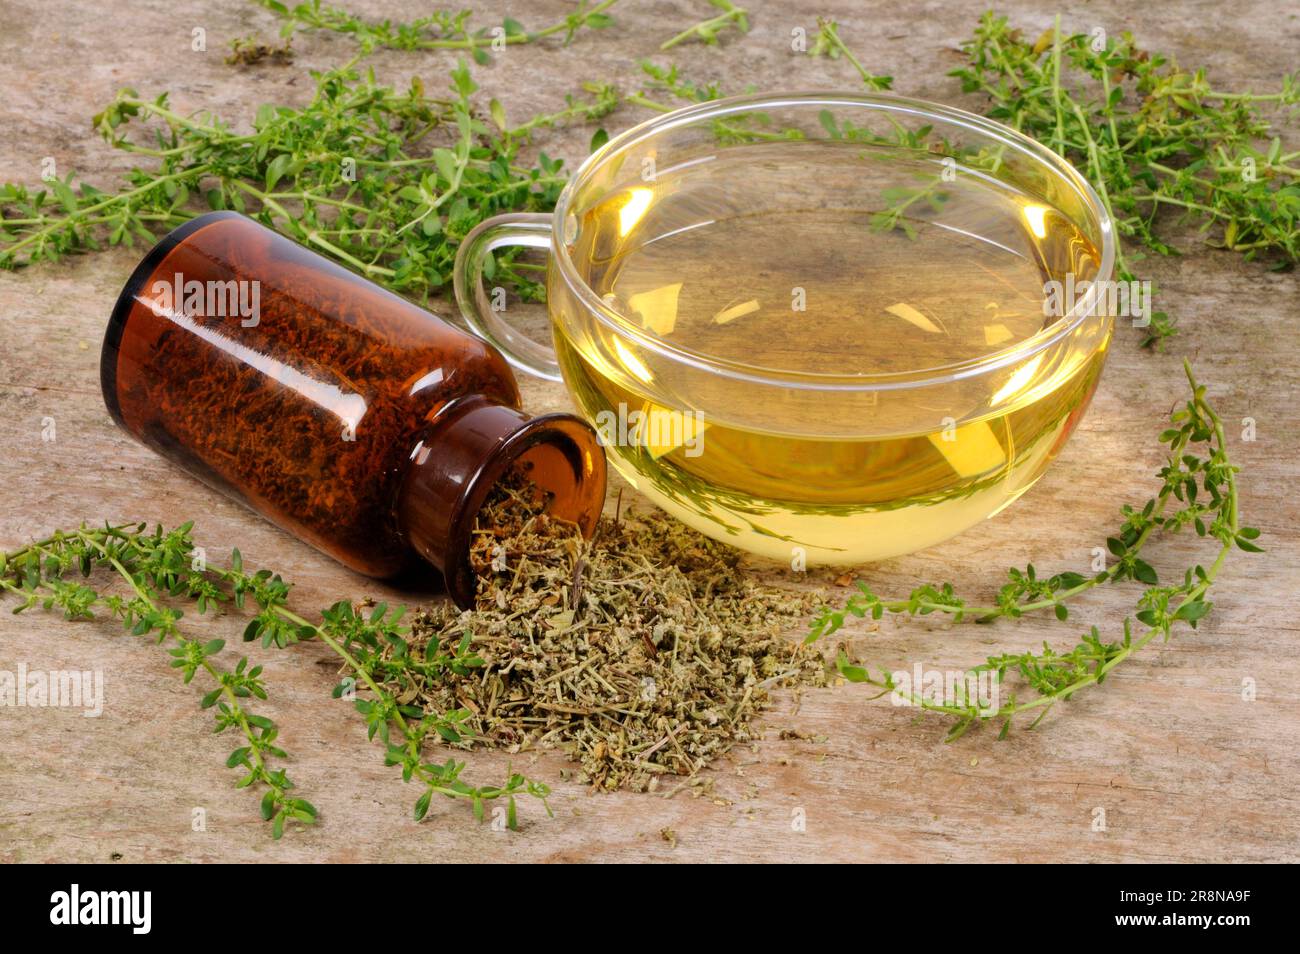 Herniaria glabra (Herniaria glabra), Cup of Rupturewort Tea, Smooth Centaury, Urinary Weed, Cuckoo Soap, Kidney Weed, Christian Sweat, Passionflower Stock Photo